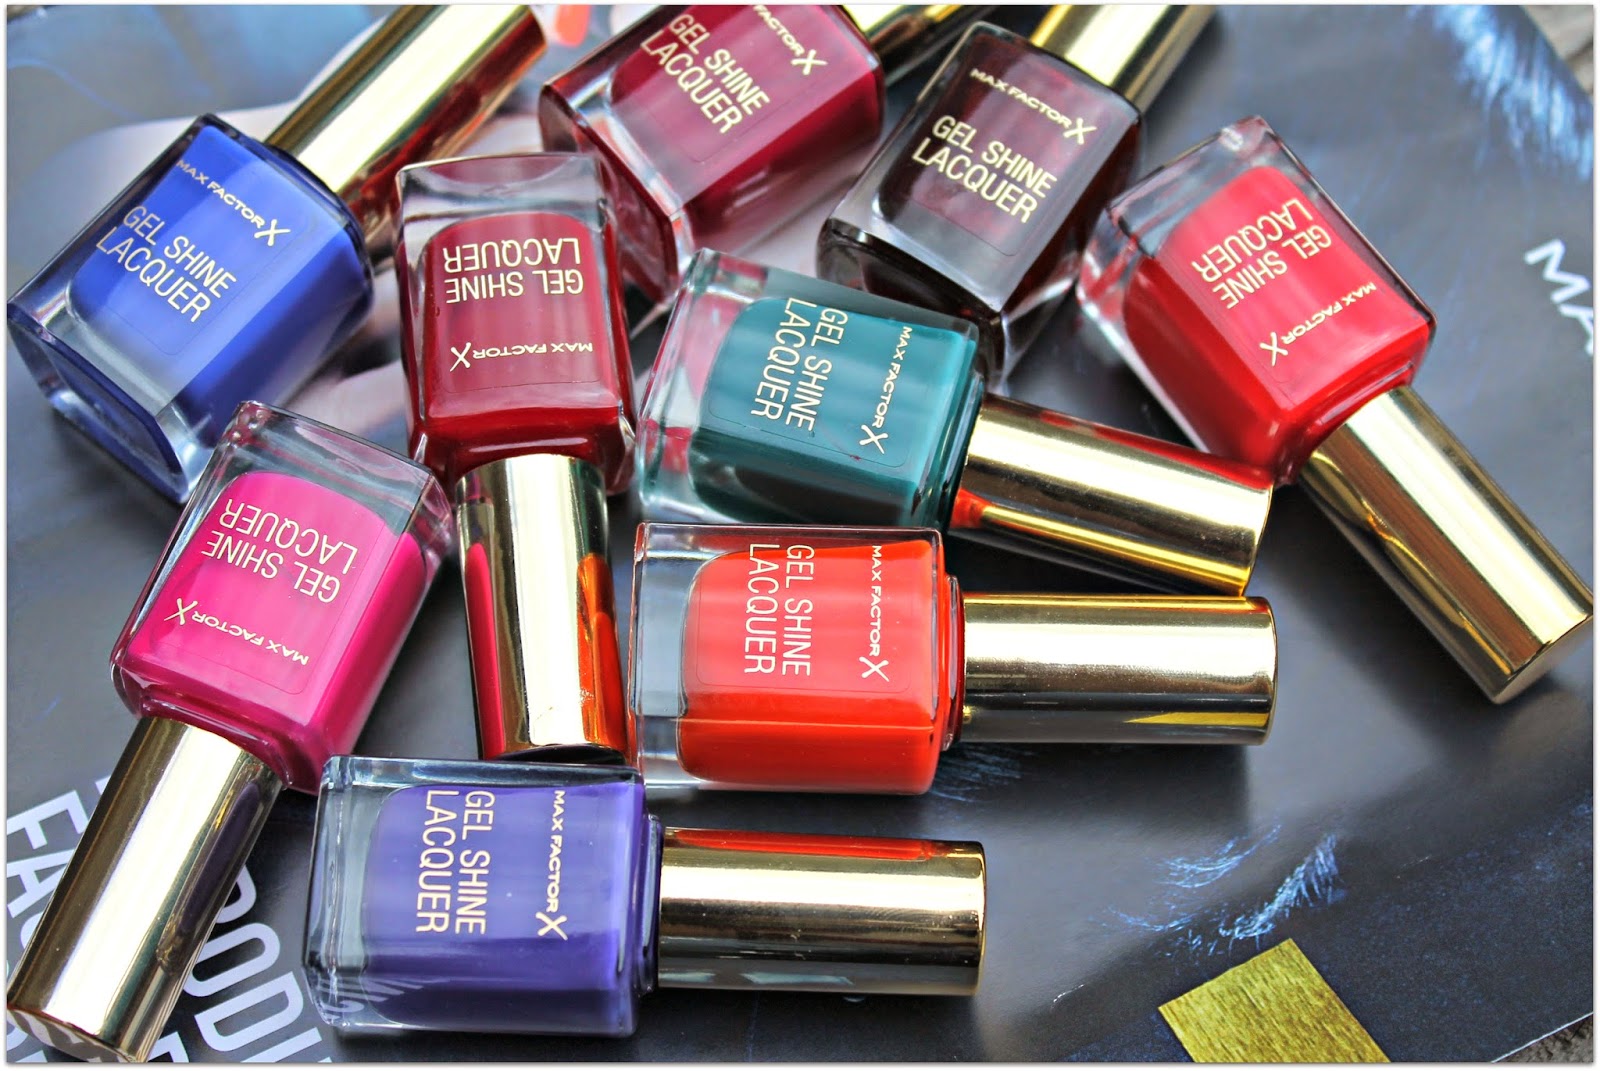 Max Factor Gel Shine Lacquers